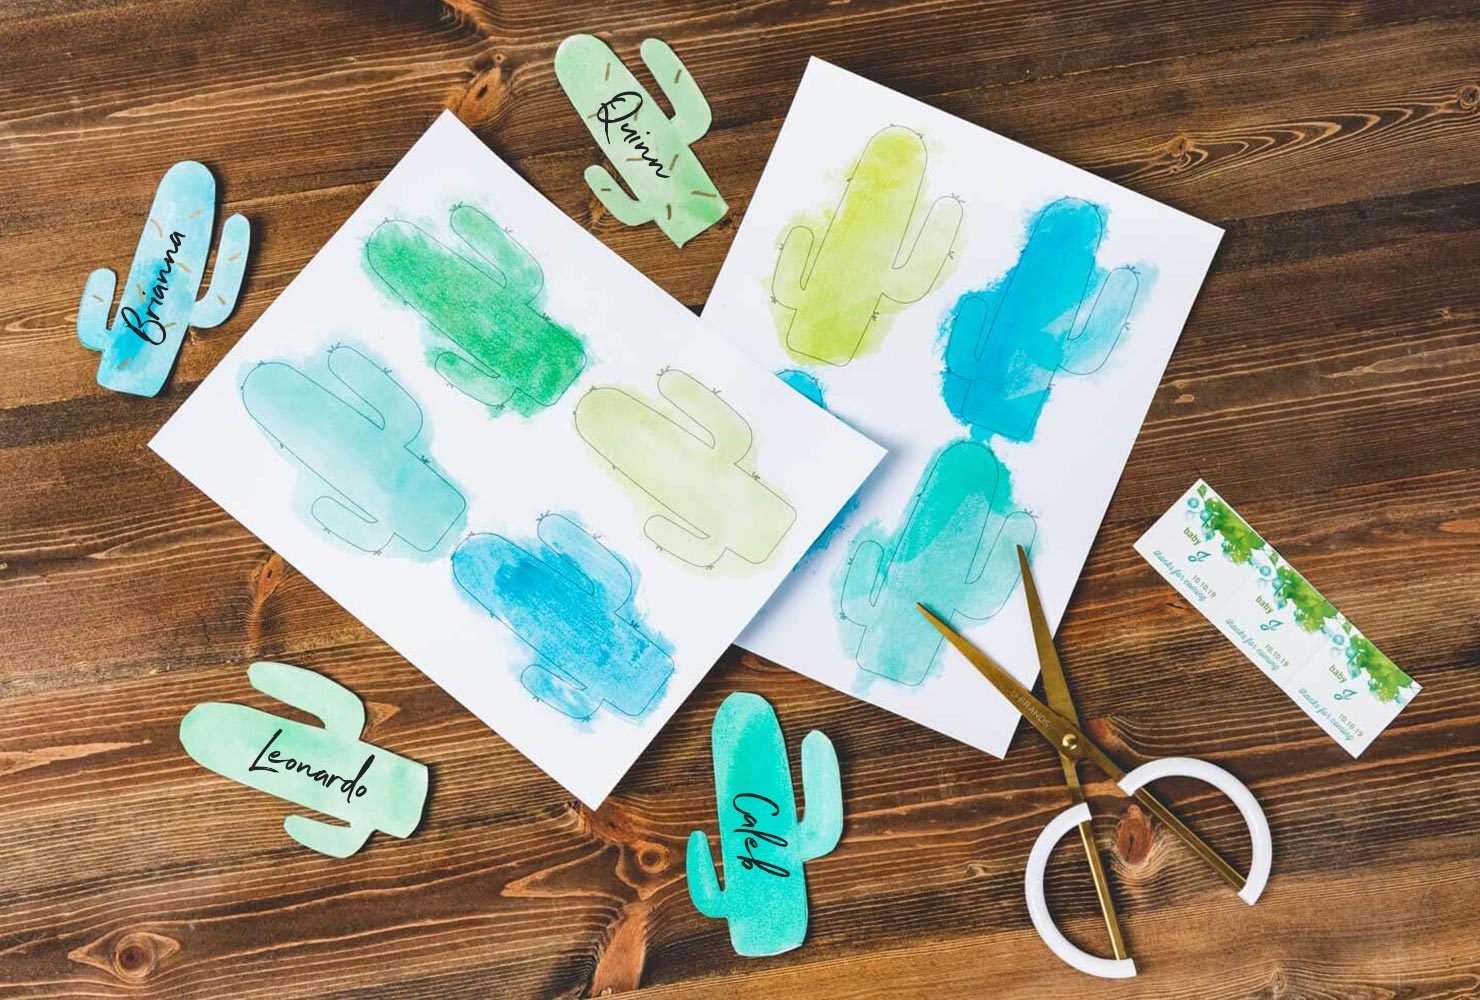 cactus printables with family names.